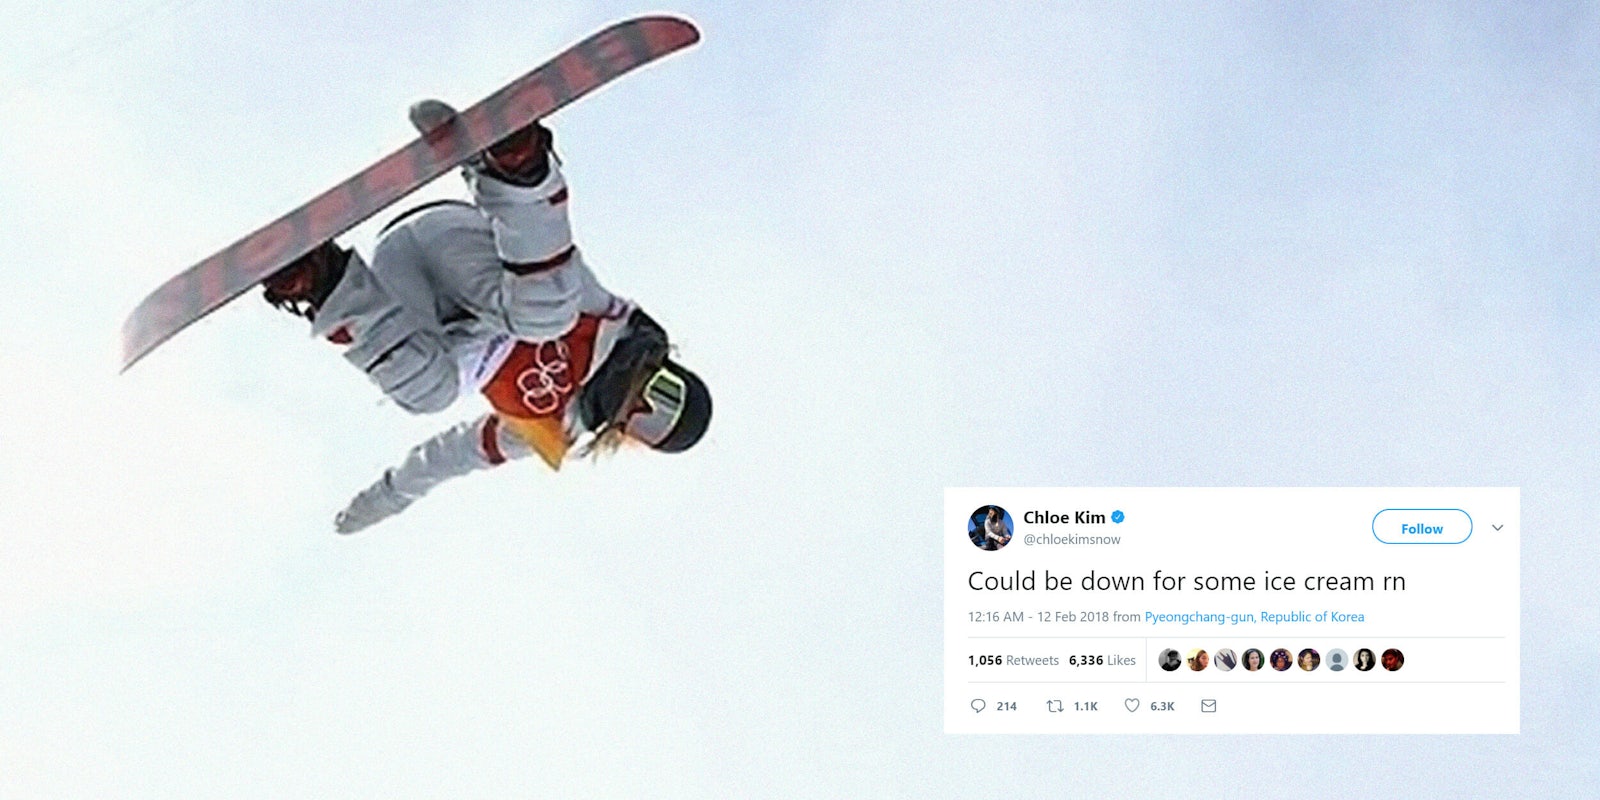 Chloe Kim flying through the air on a snowboard with 'Could be down for some ice cream rn' tweet